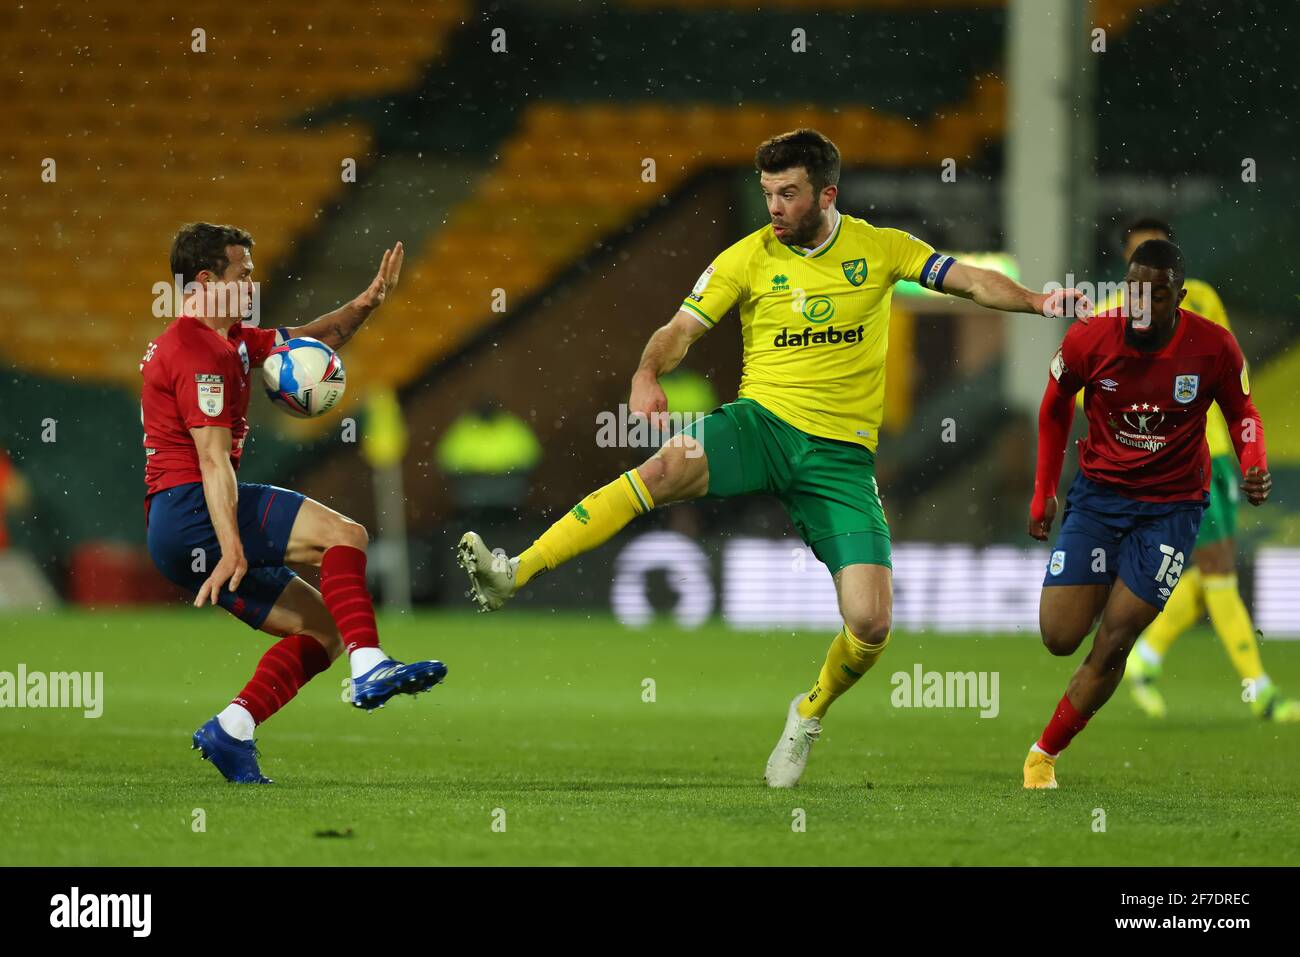 6th April 2021; Carrow Road, Norwich, Norfolk, England, English Football League Championship Football, Norwich versus Huddersfield Town; Grant Hanley of Norwich City challenges Jonathan Hogg of Huddersfield Town Stock Photo